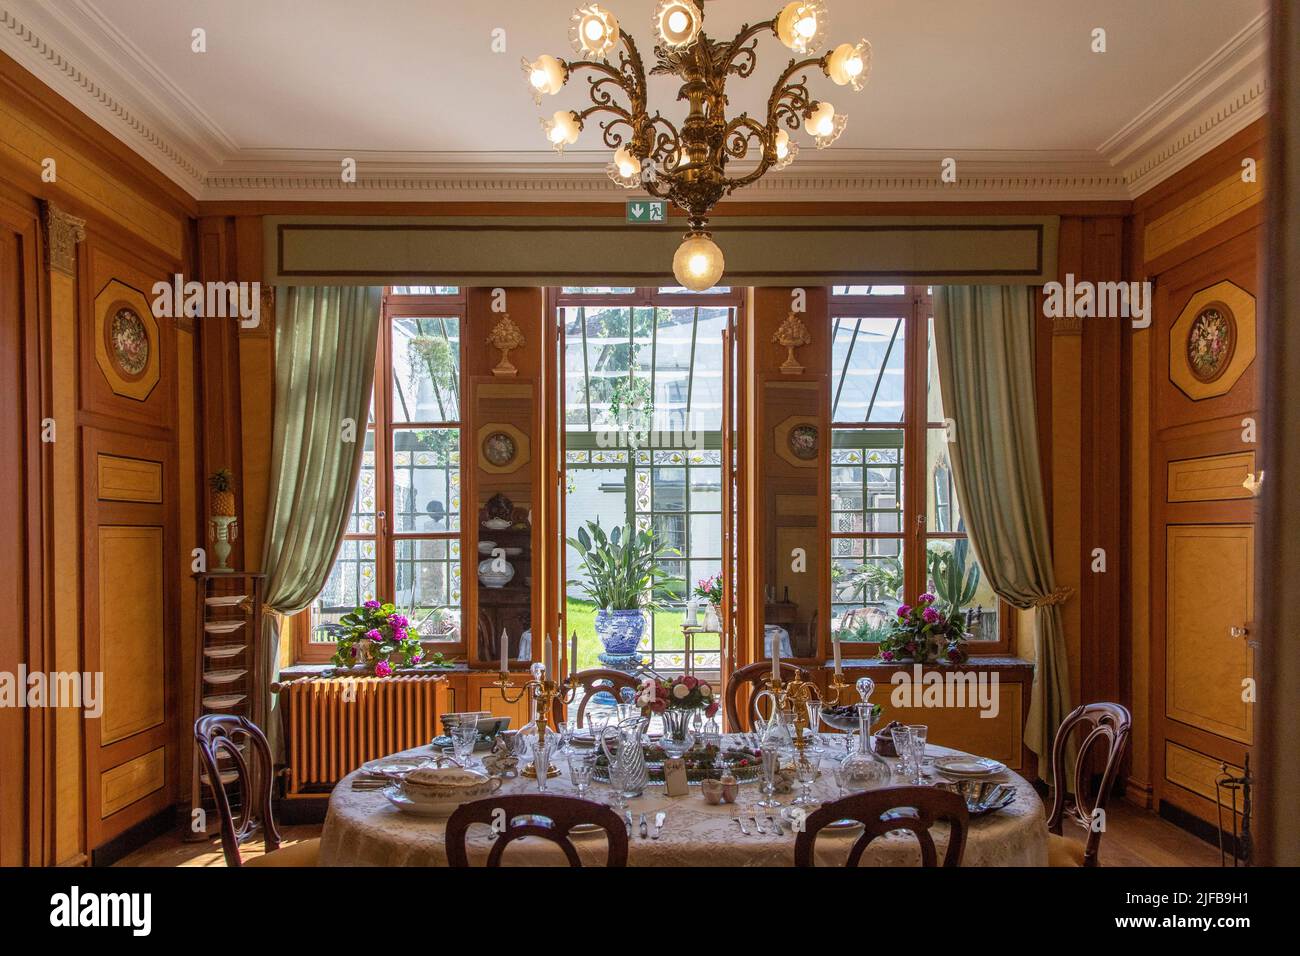 France, Nord, Lille, Charles de Gaulle birthplace, transformed into a museum and located in Old Lille, dining room Stock Photo